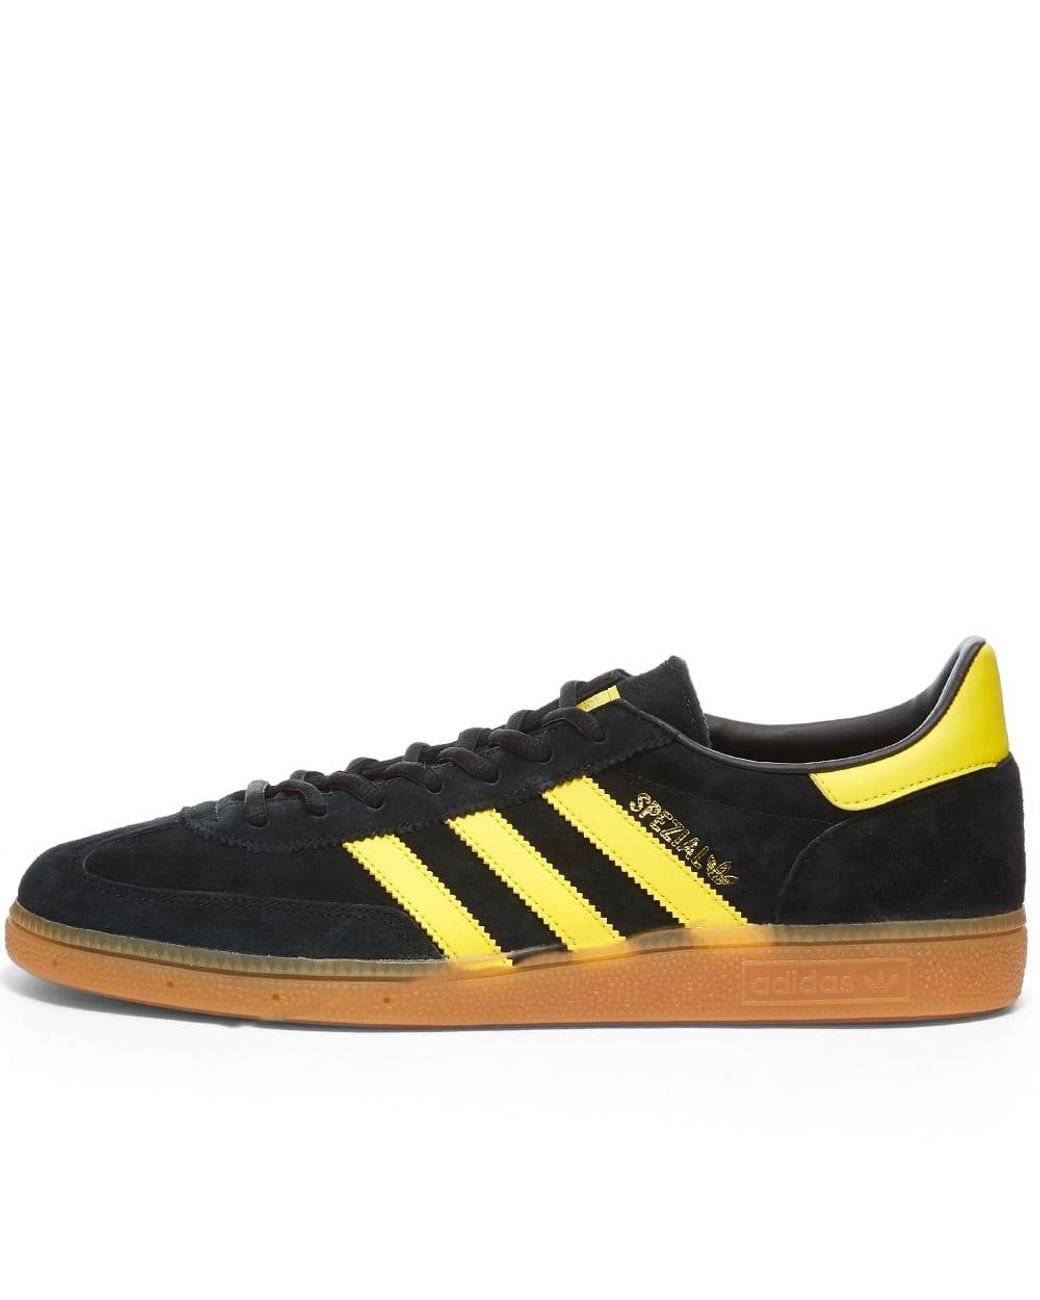 series Bat Rooster adidas Handball Spezial Black, Yellow Shoes for Men | Lyst